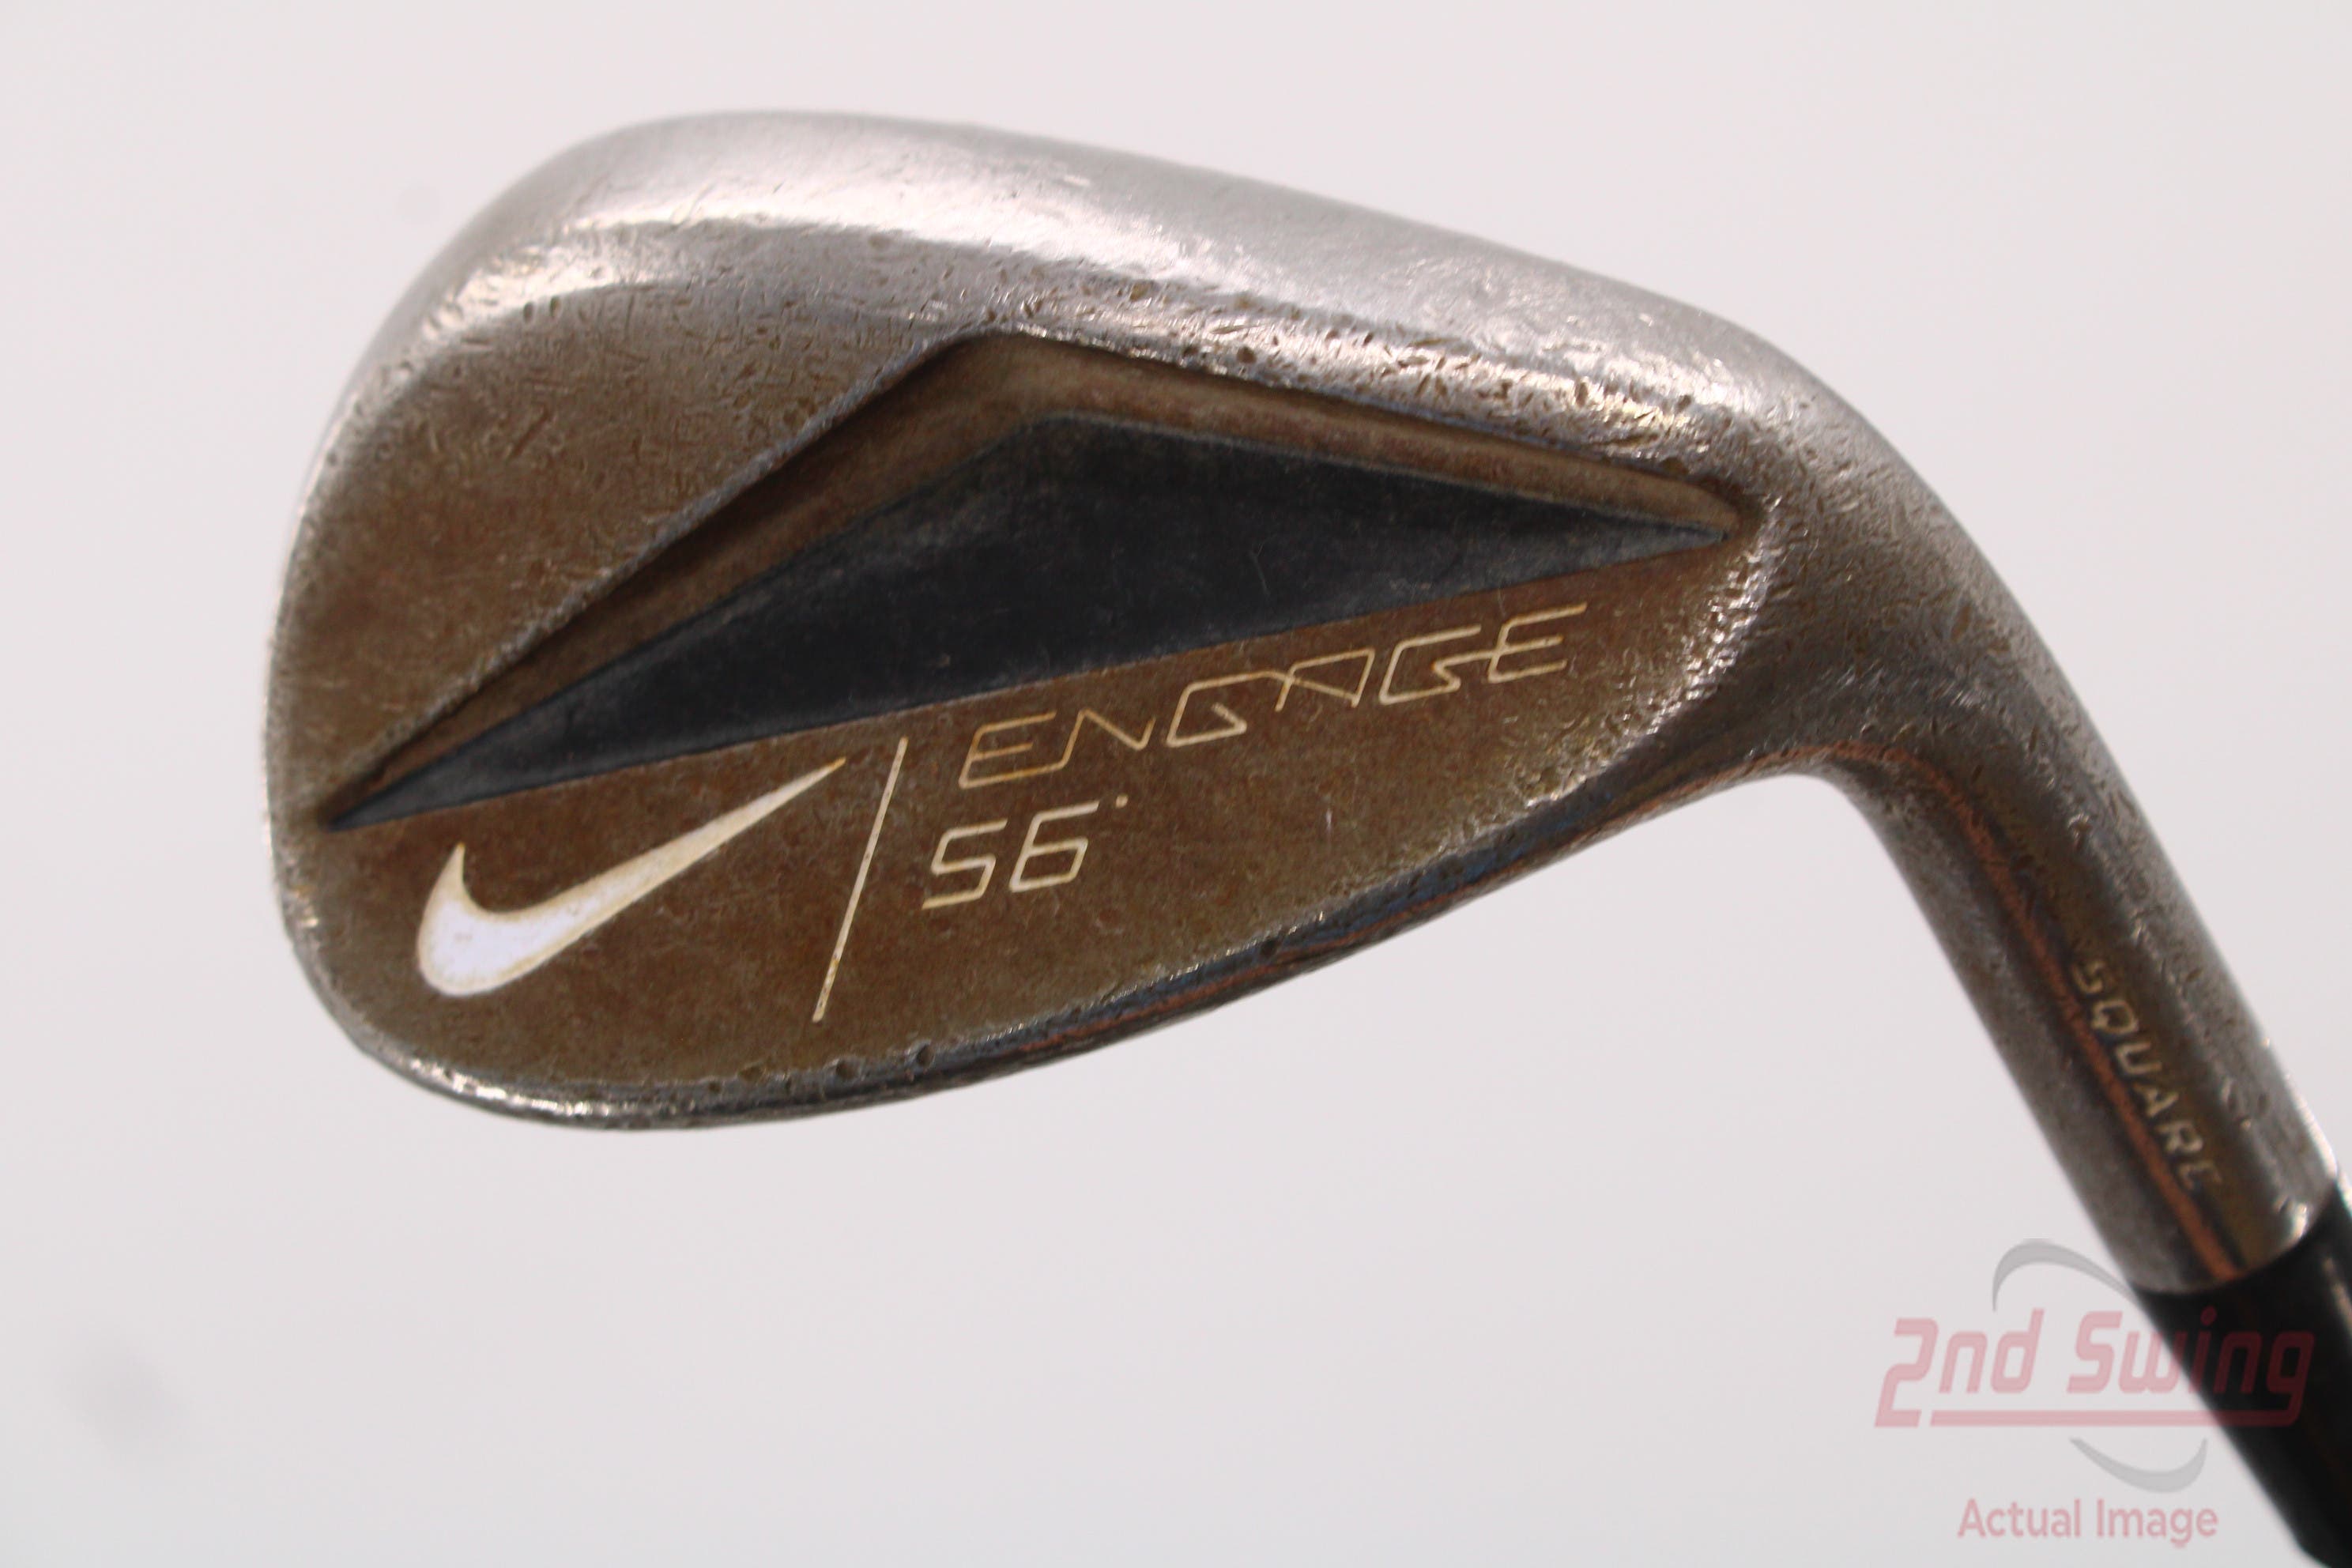 Nike Engage Square Sole 2nd Swing Golf